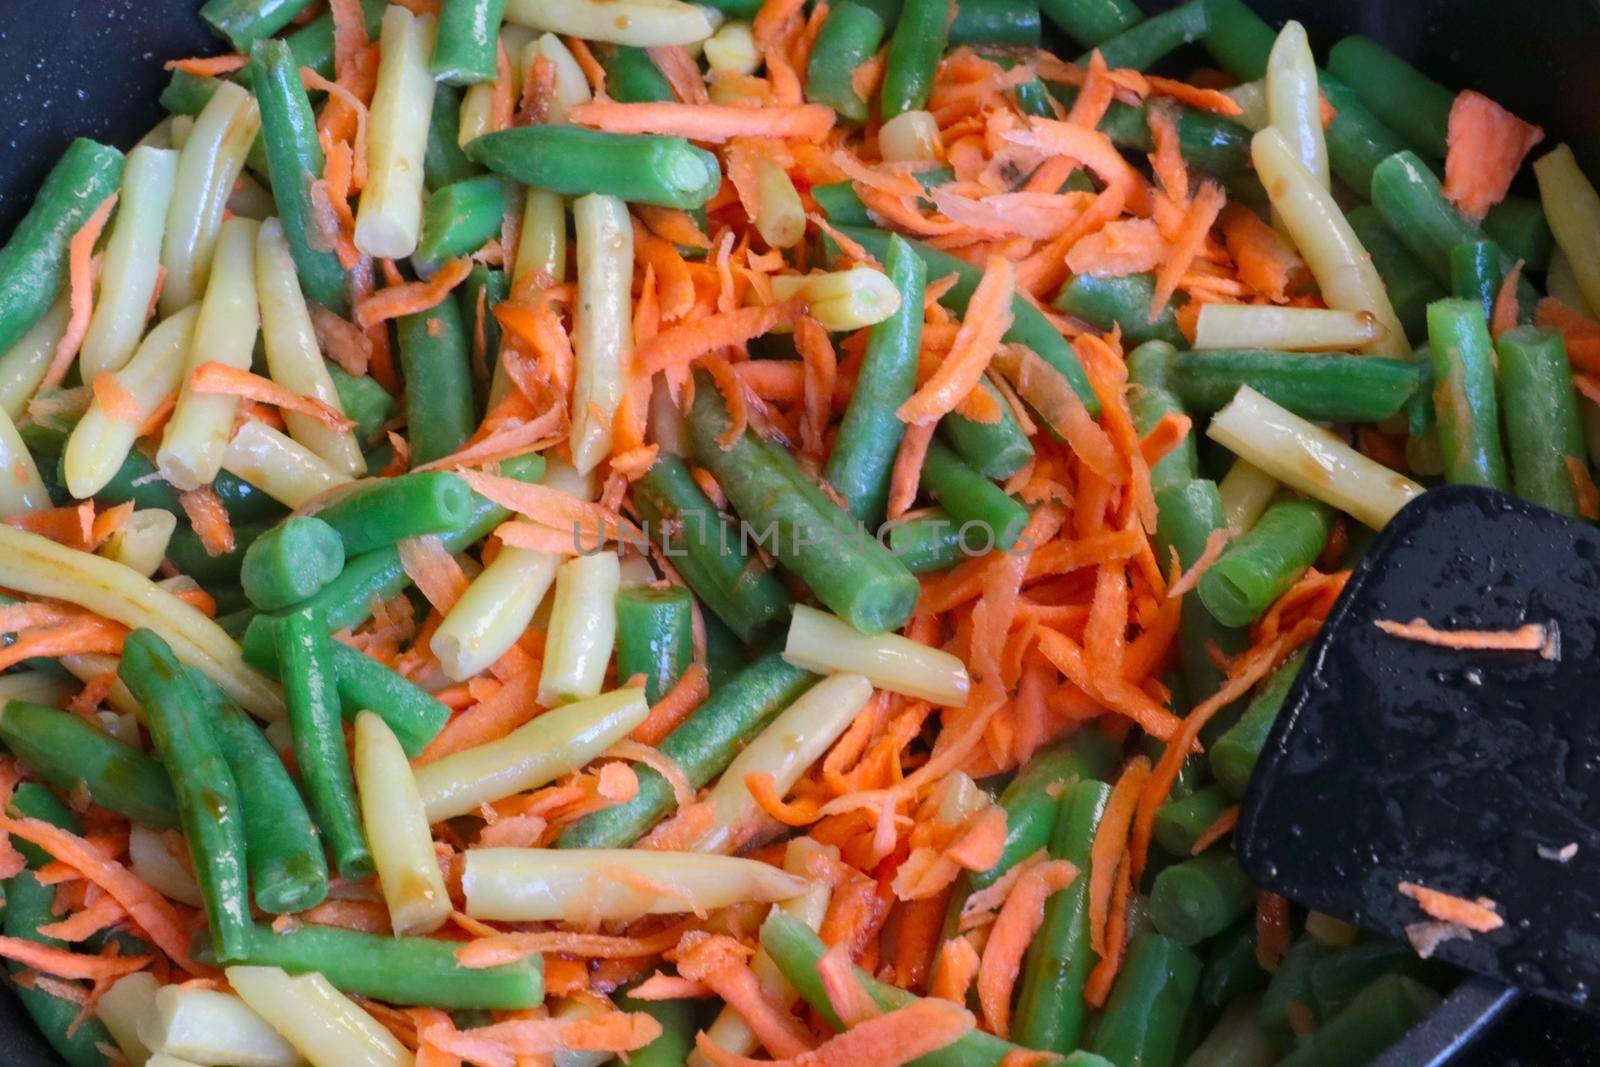 Asparagus beans with carrots are cooked in a pan